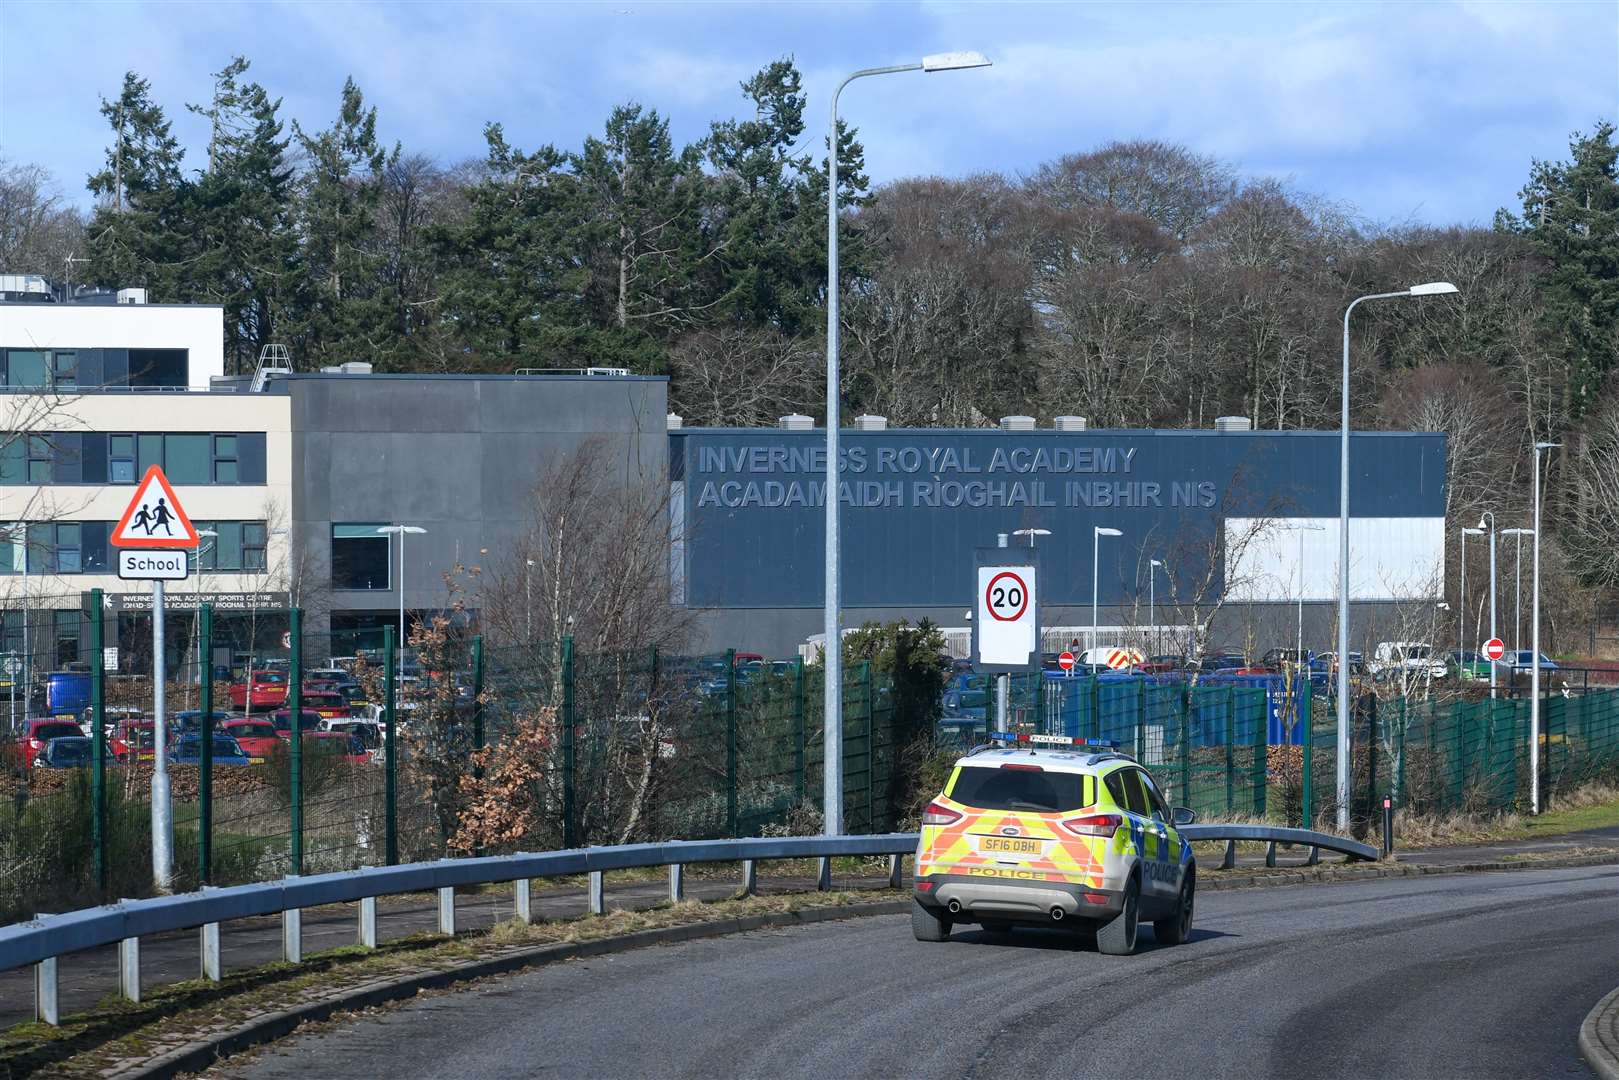 A police car seen patrolling near the Inverness Royal Academy following the malicious email.